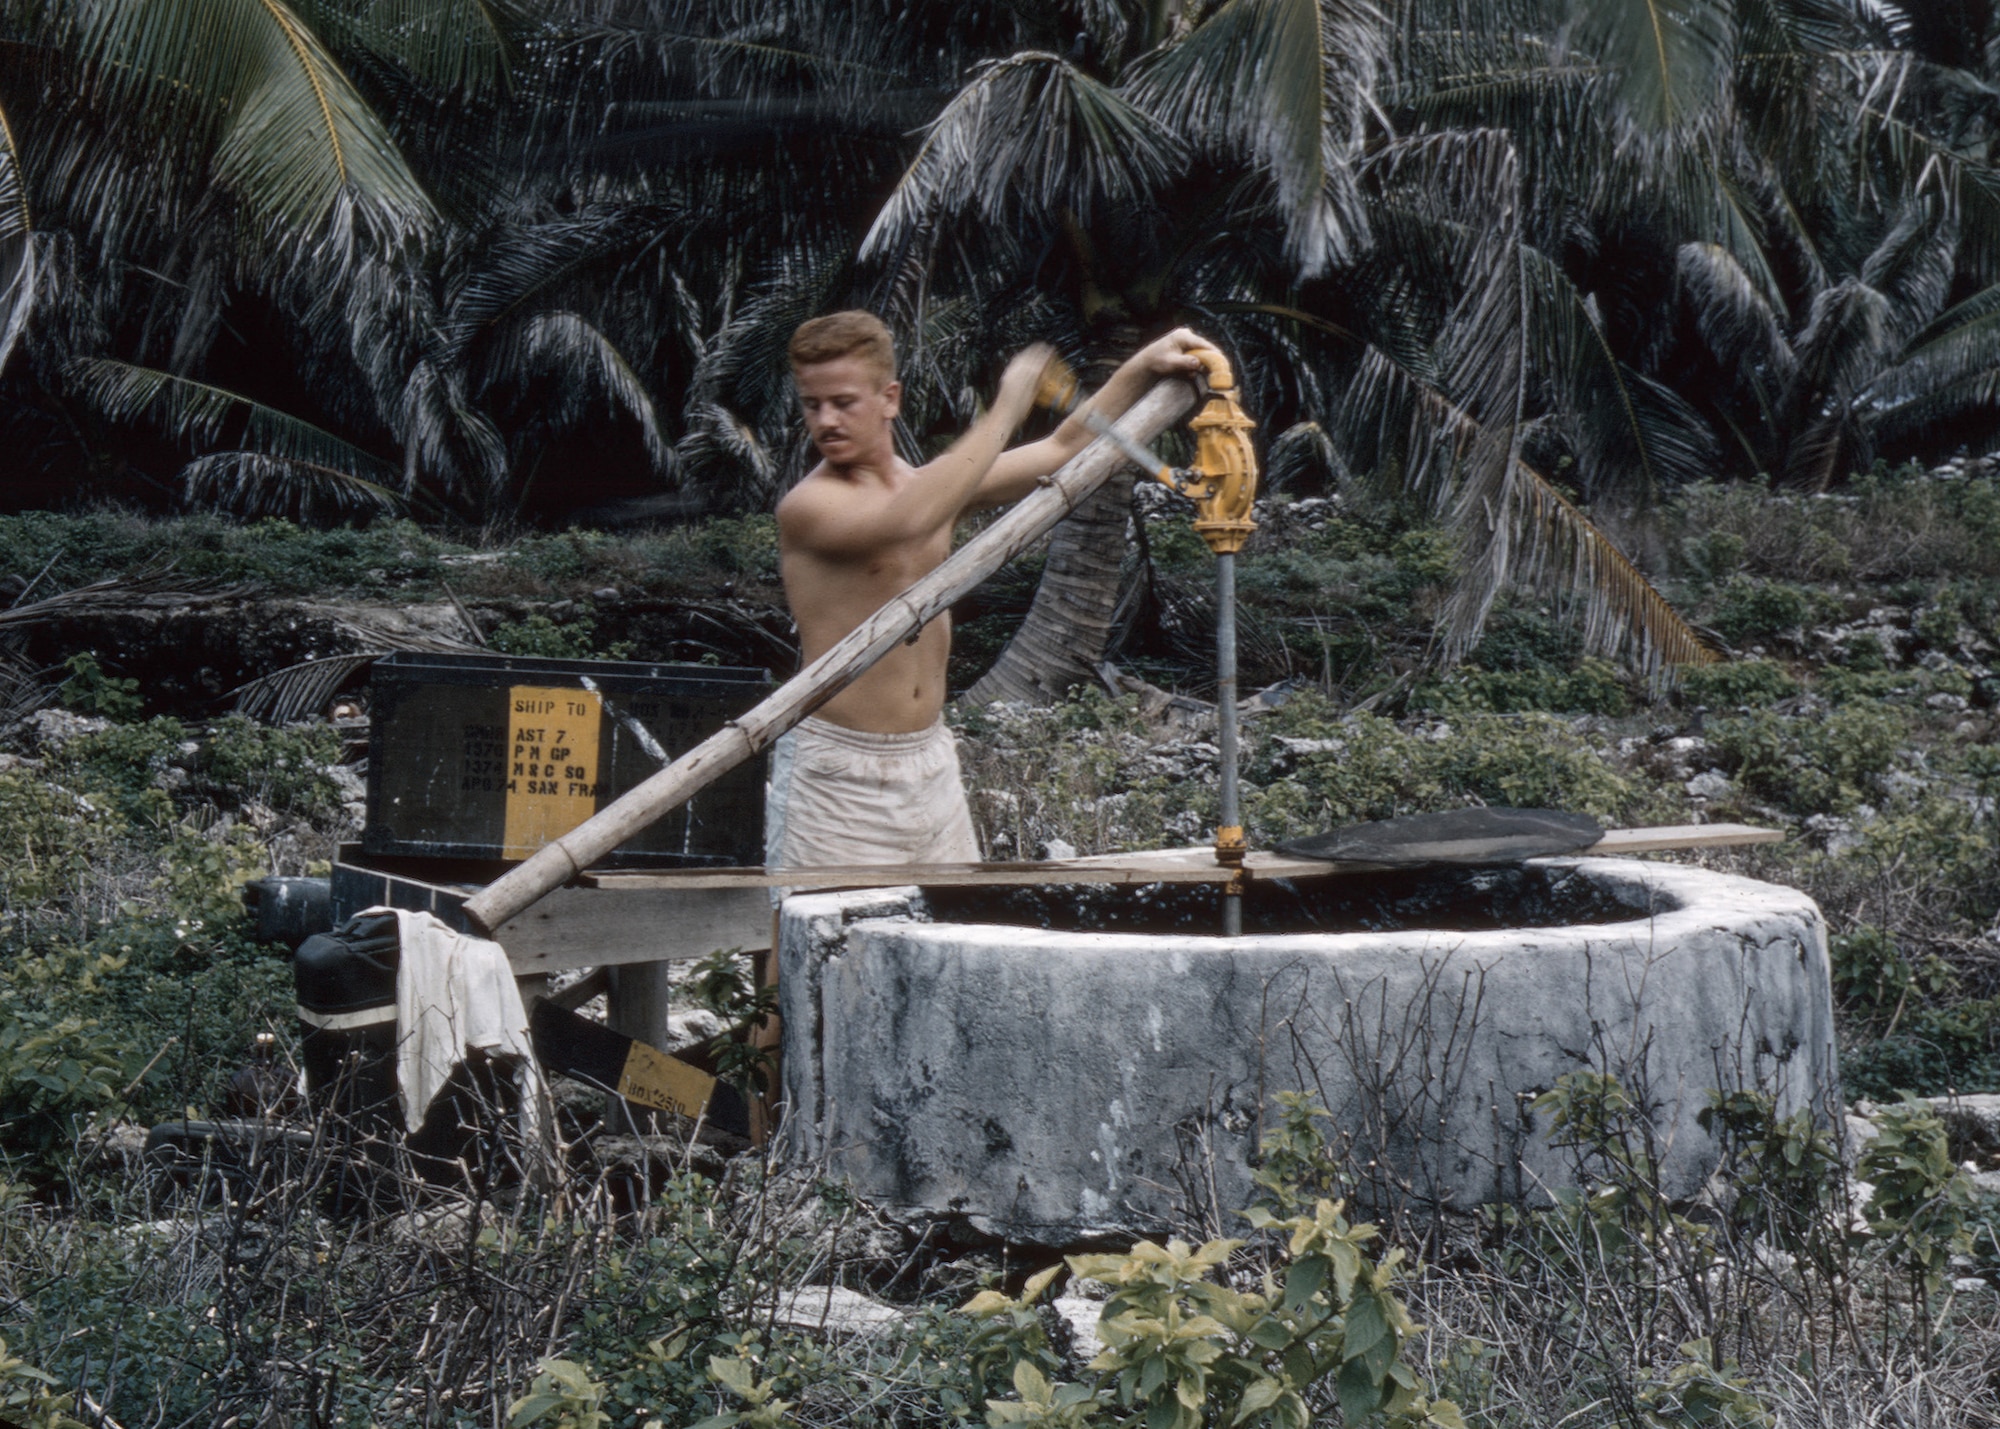 Airman 2nd Class Bob ‘Red’ Cunningham, of the 1374th Mapping and Charting Squadron, pumps water from an old well on North Danger Island in 1956. The Airmen only used this for laundry and washing. Drinking water was delivered in 55-gallon barrels. (Courtesy photo/Bob Cunningham)